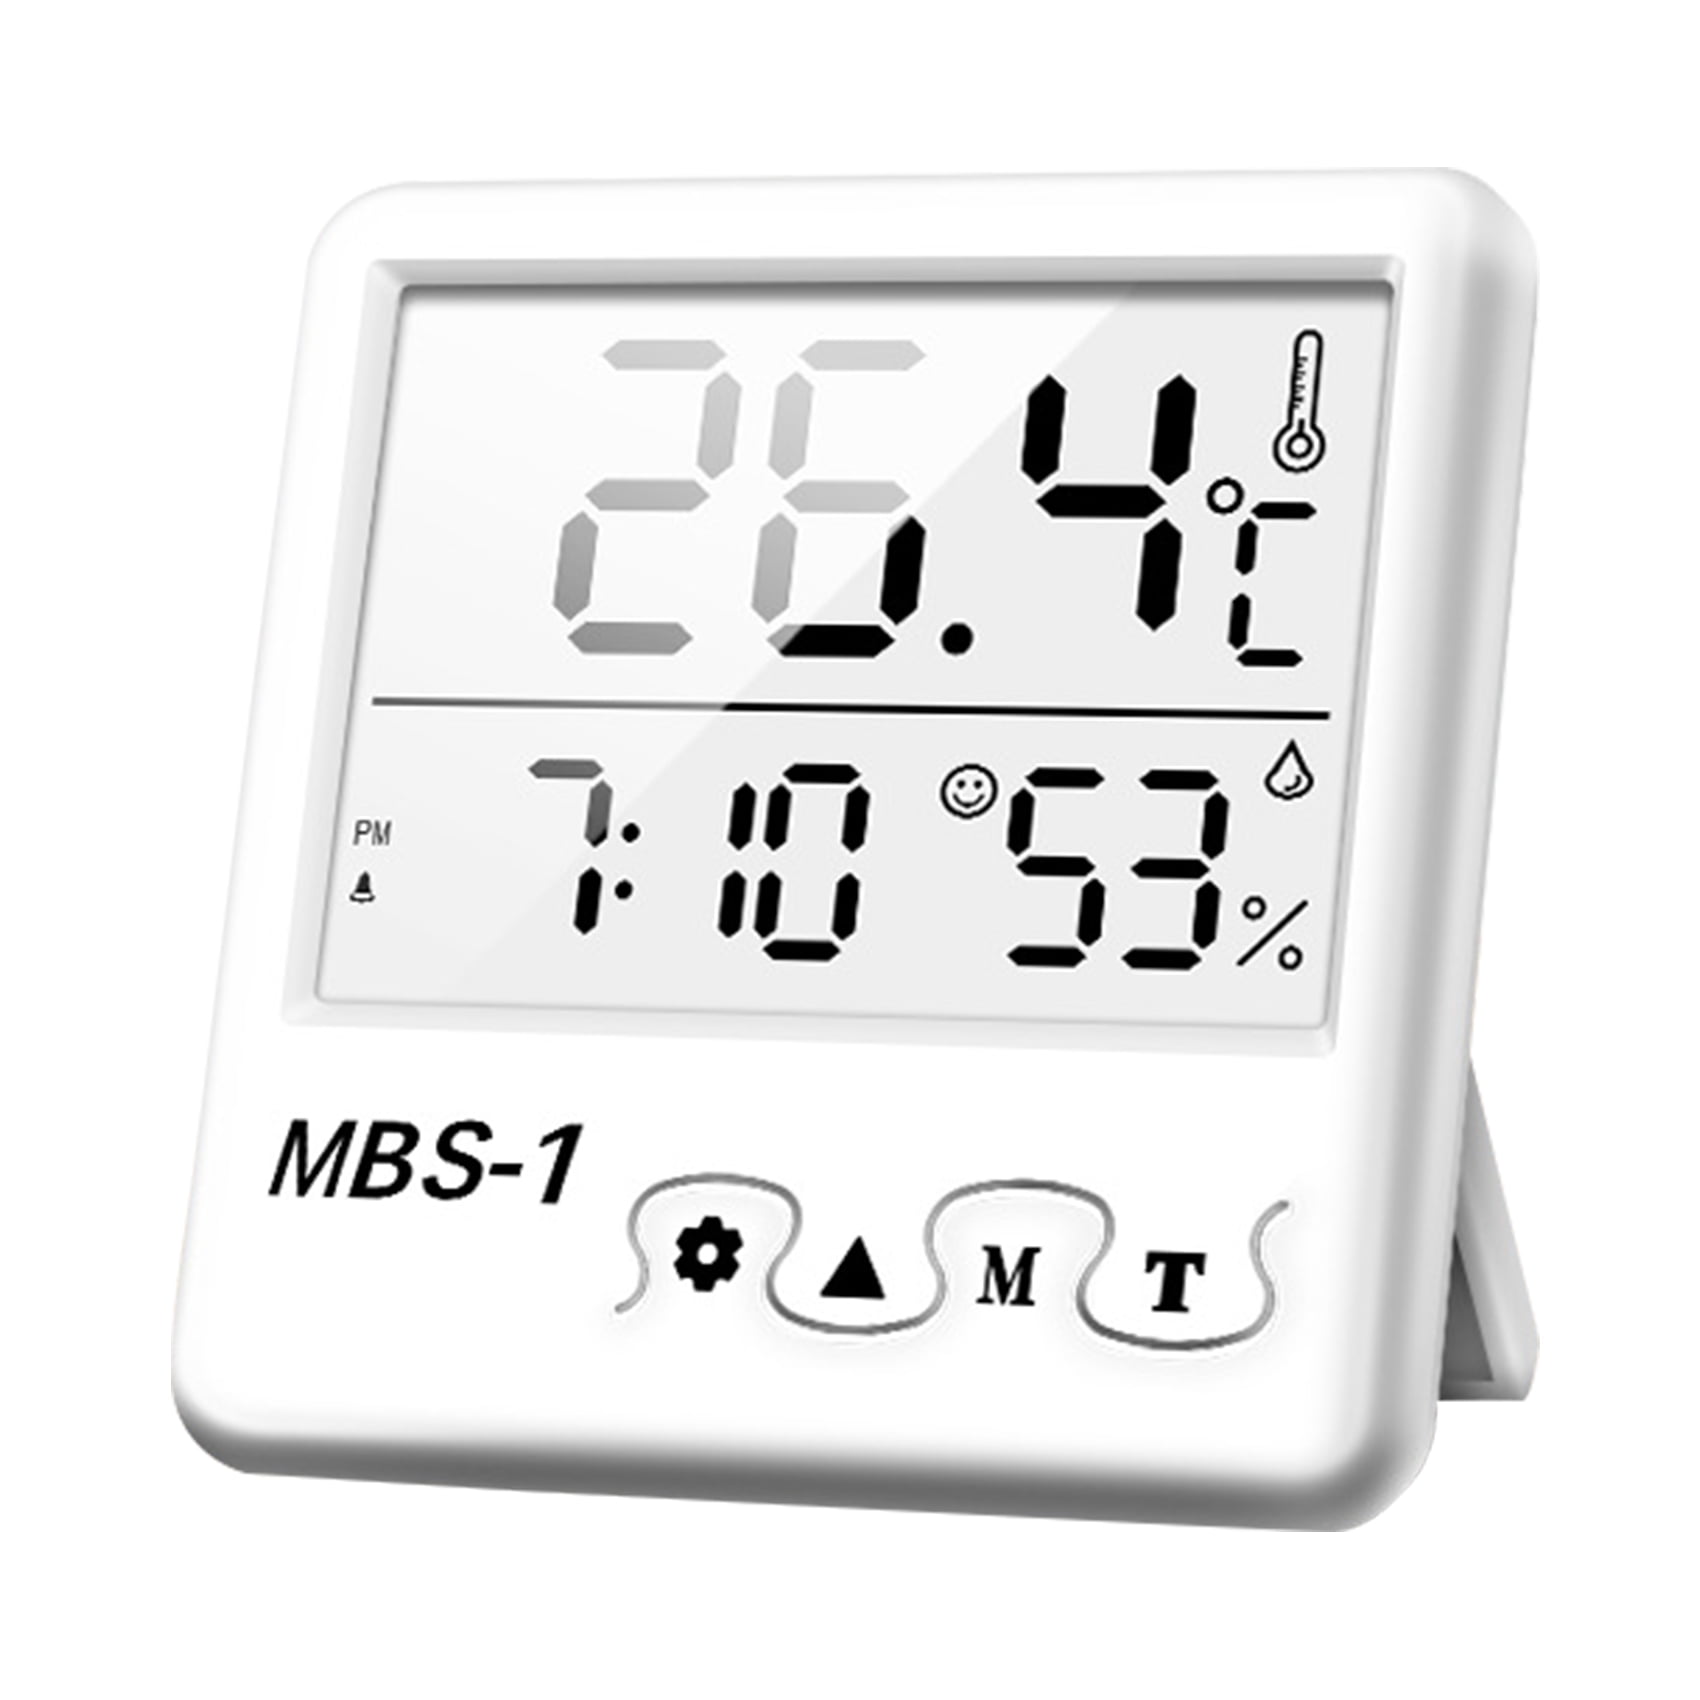 Details about   Digital LCD Thermometer Humidity Meter Temp Indoor Room Max/Min Hygrometer Gauge 